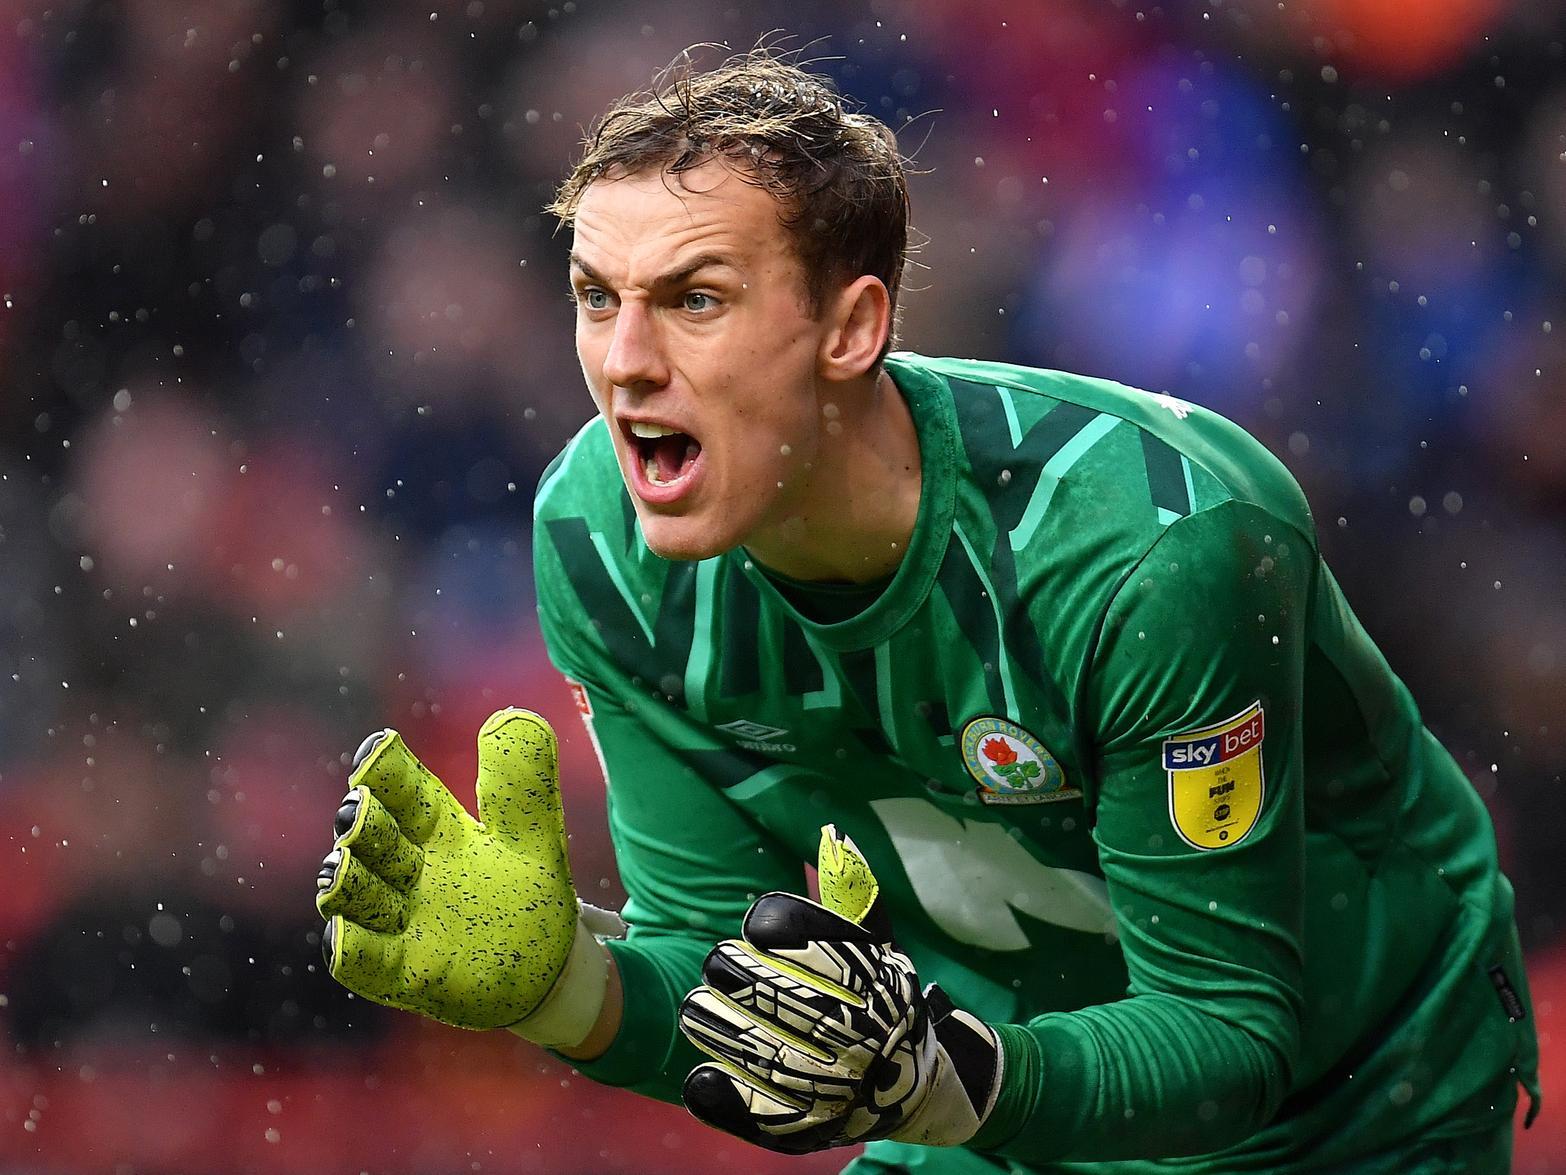 A host of Premier League sides are said to be keeping a close eye on Brighton stopper Christian Walton, who has excelled on his loan spell with Blackburn Rovers so far this season. (The 72)